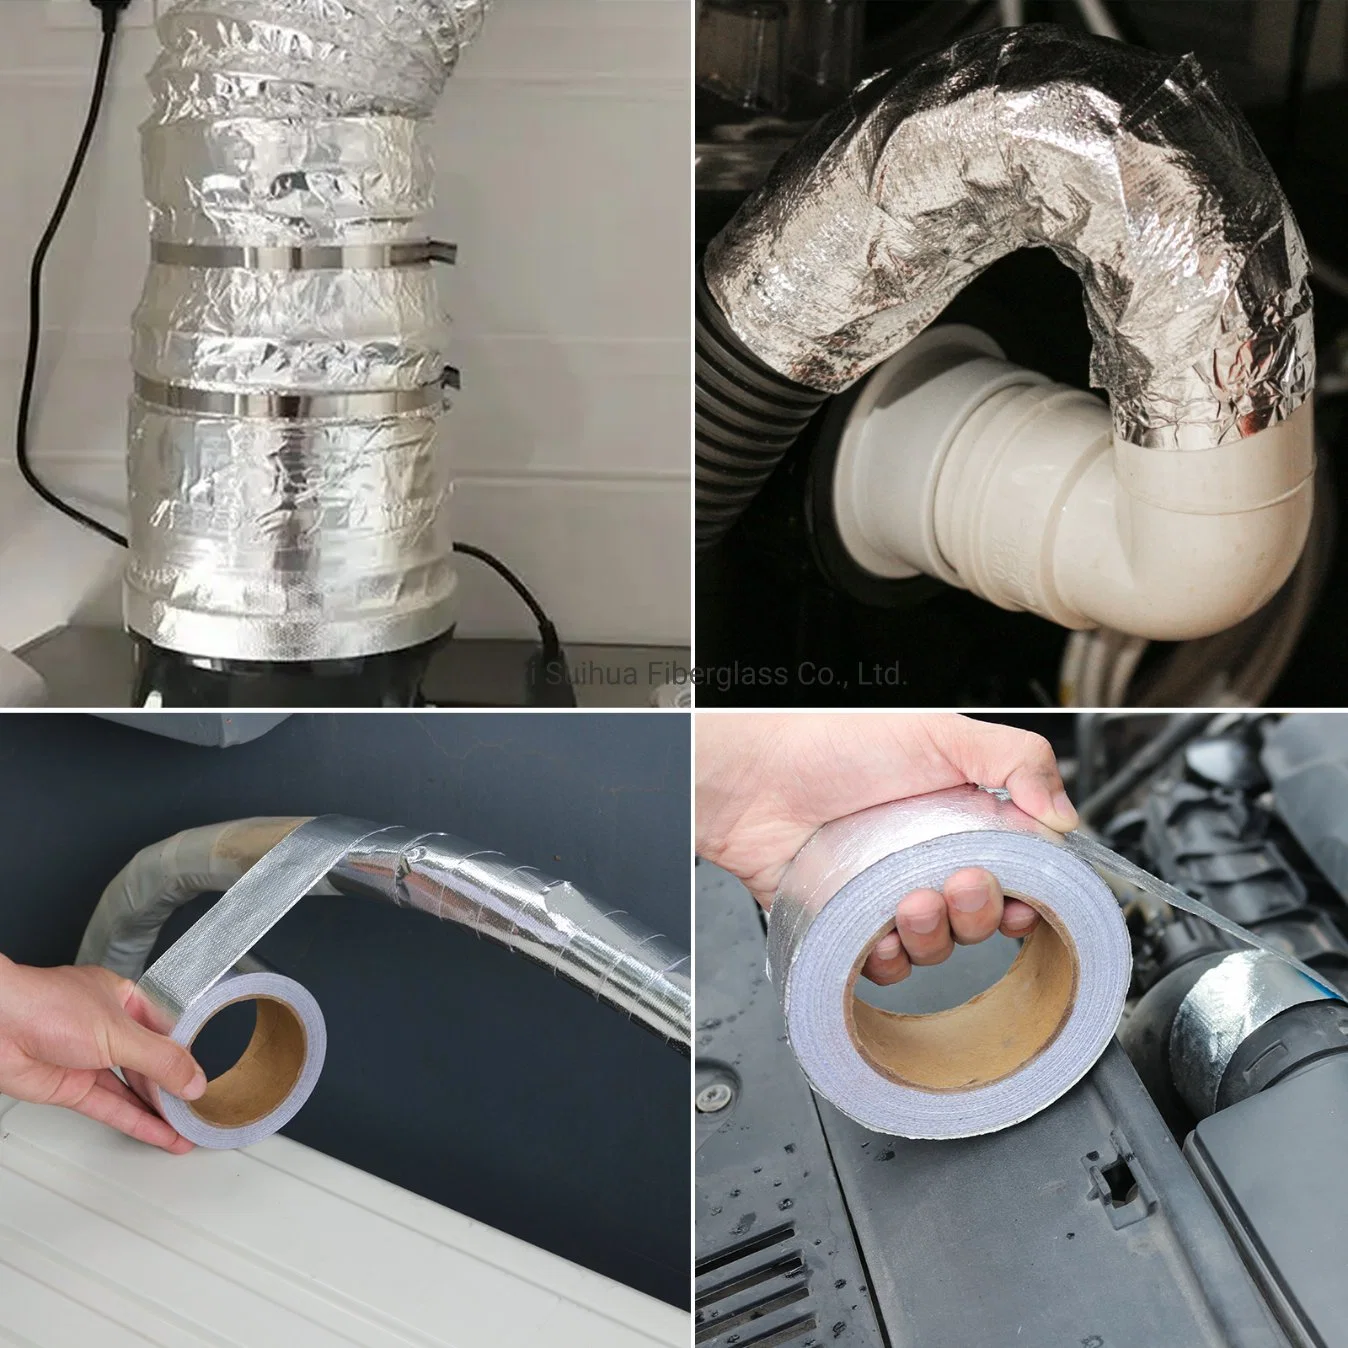 Seaming Against Moisture Aluminum Foil Adhesive Tape for Sealing Joints, Aluminum Air Duct Tape